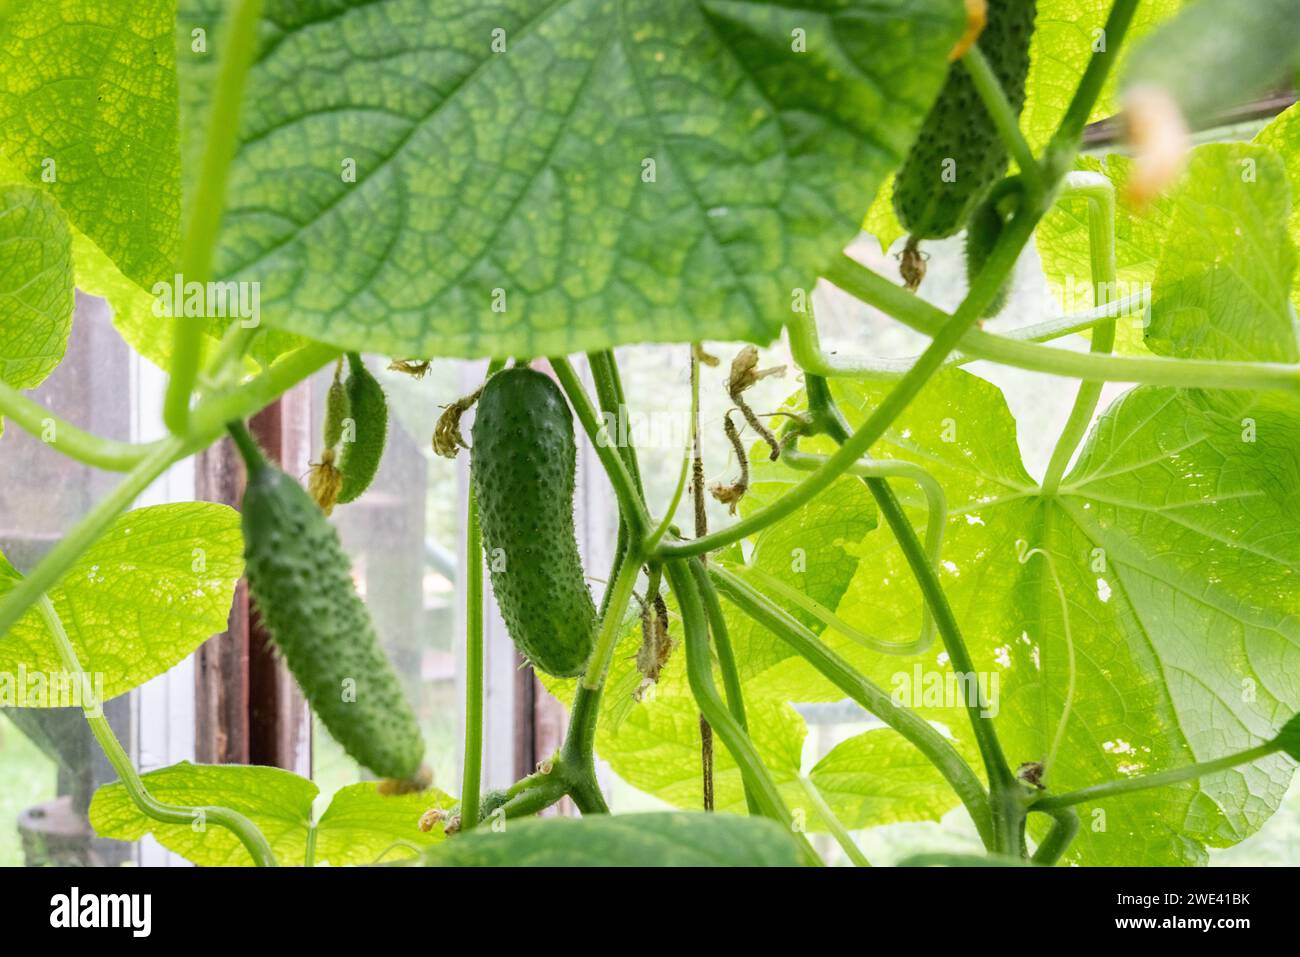 Plants in greenhouse. Greenhouse Cucumber. Cucumber plants growing. Cucumber (Cucumis sativus) Stock Photo